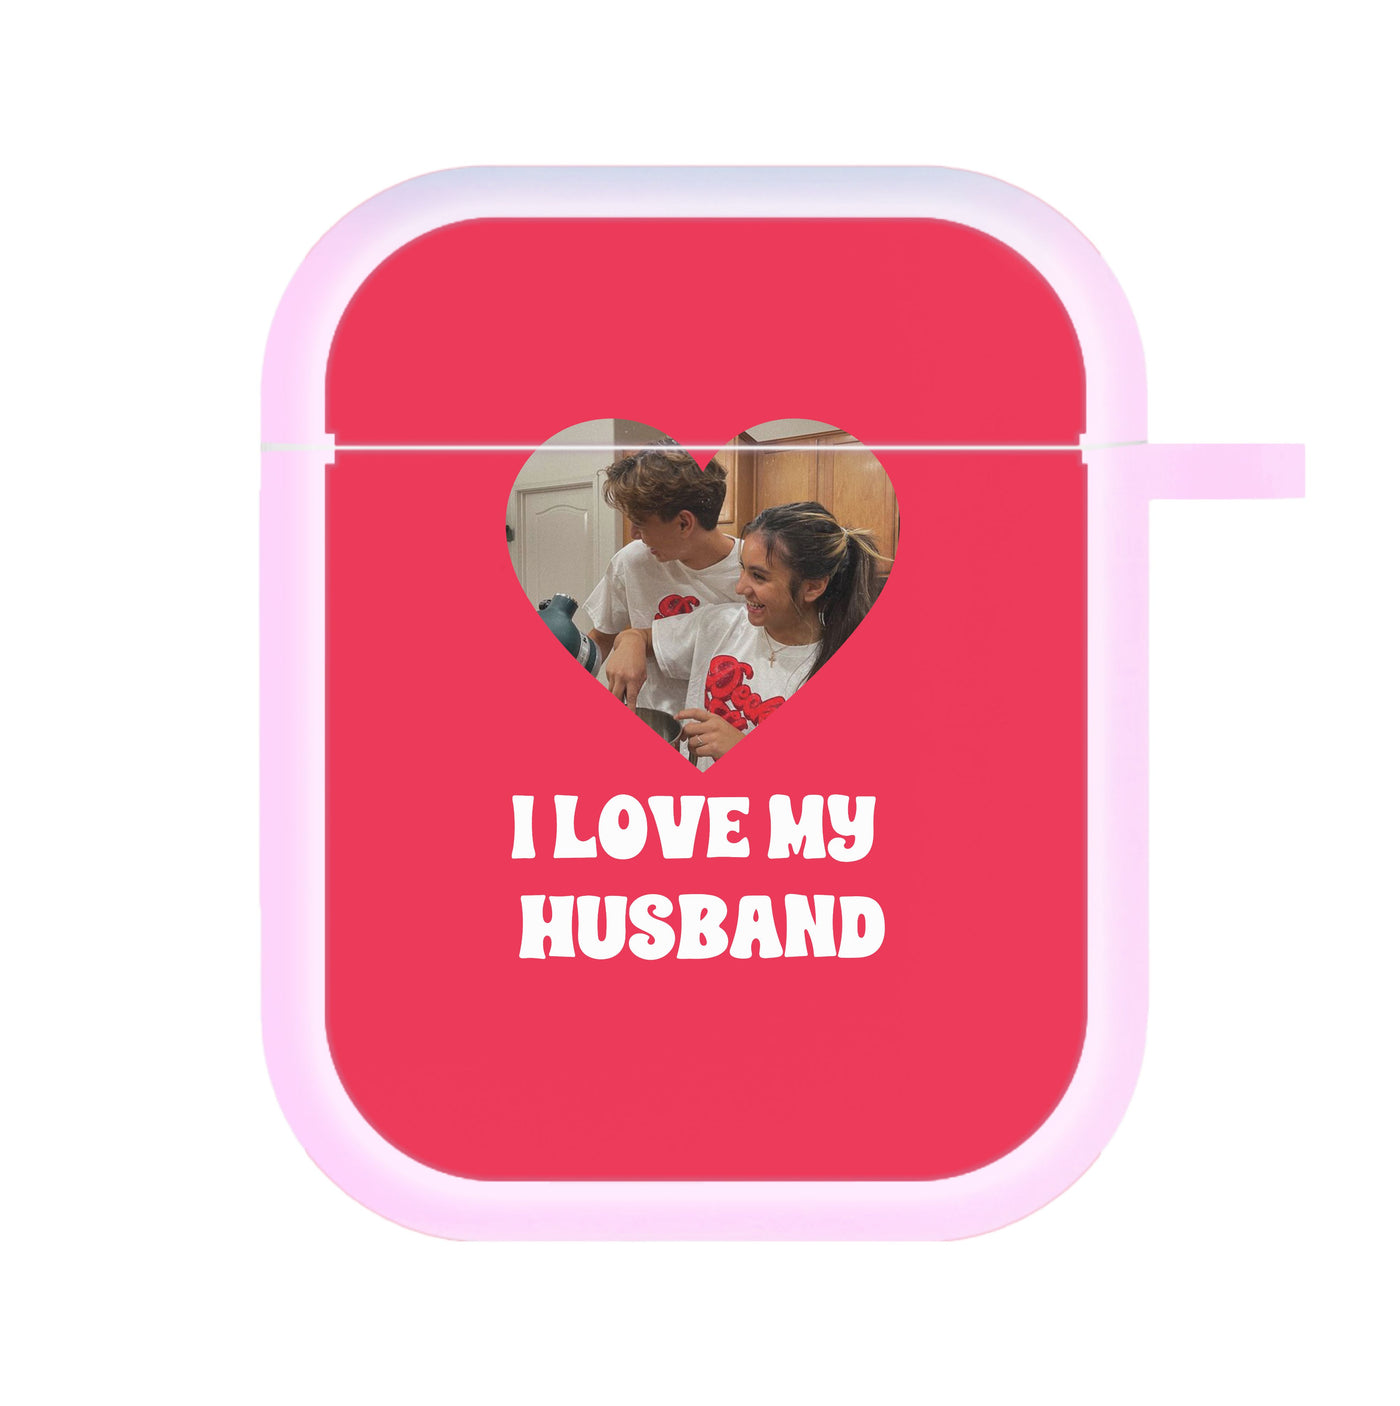 I Love My Husband - Personalised Couples AirPods Case